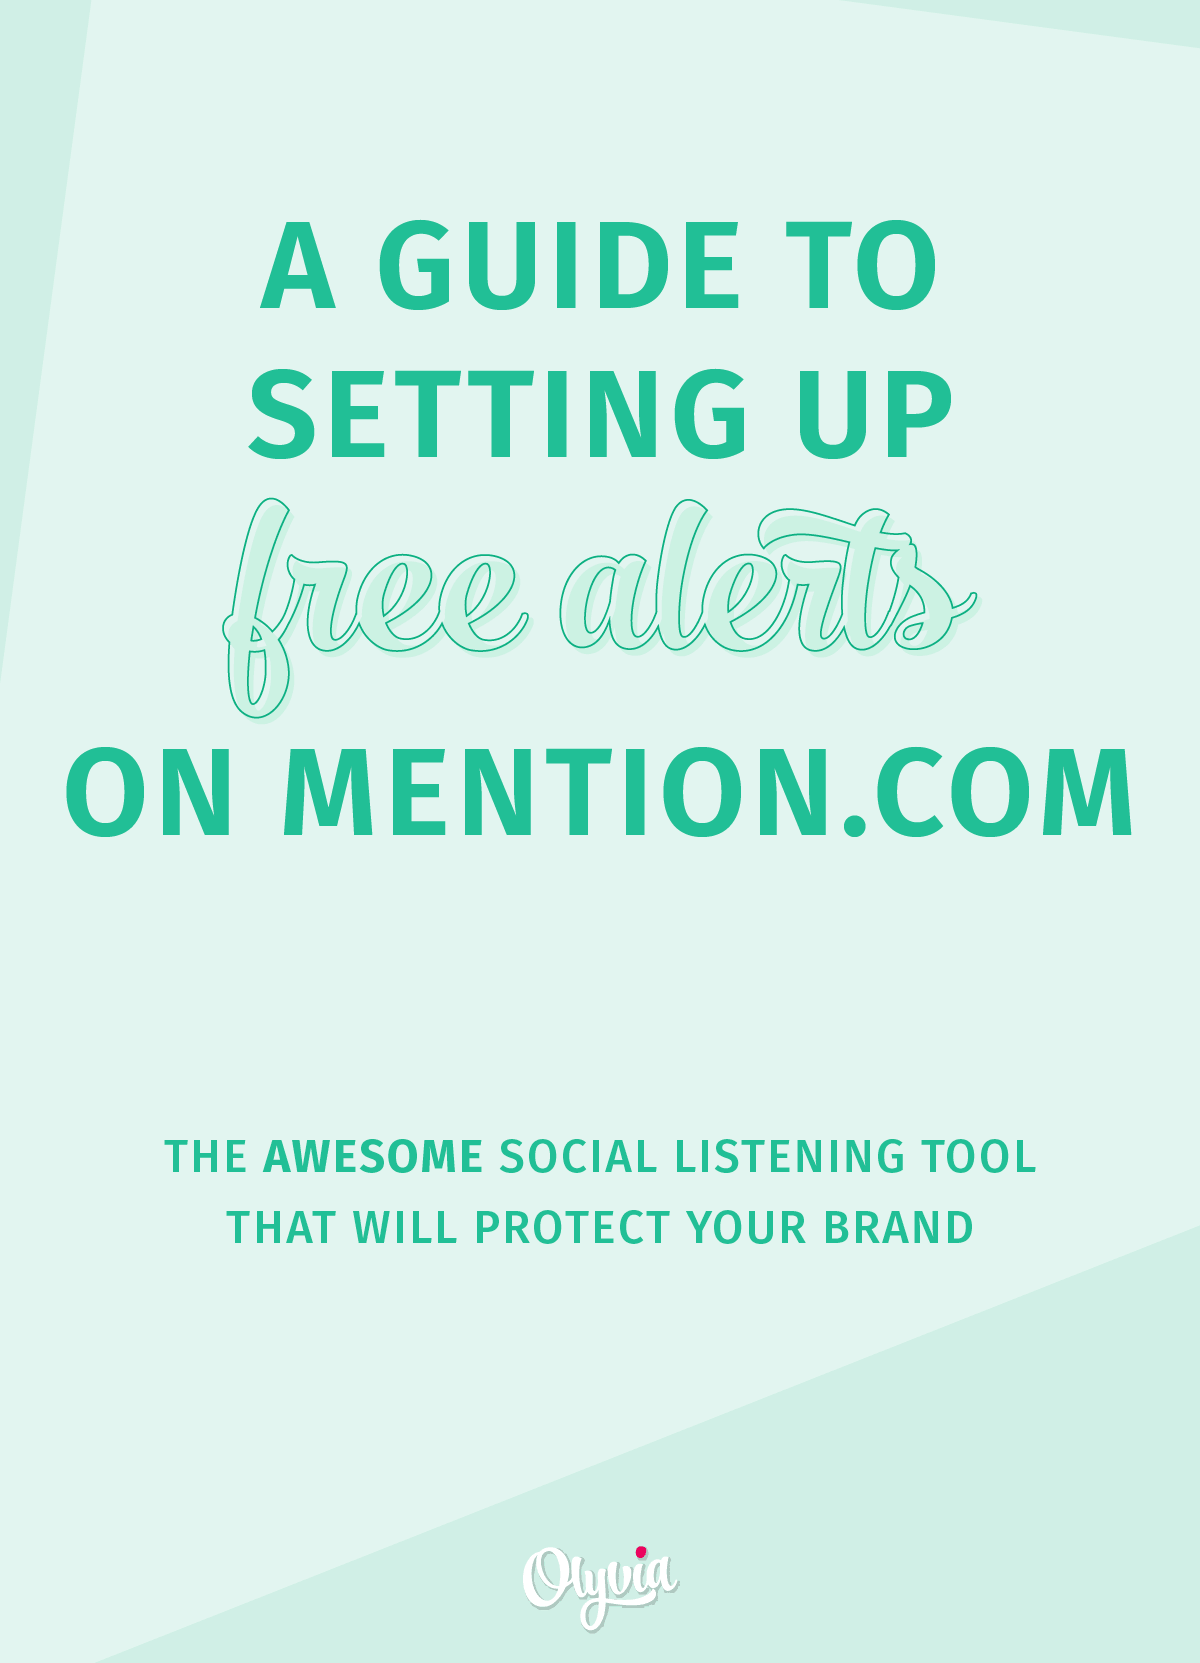 A video tutorial on how to set up free alerts on Mention.com (the awesome social listening tool that will protect your blog + brand).